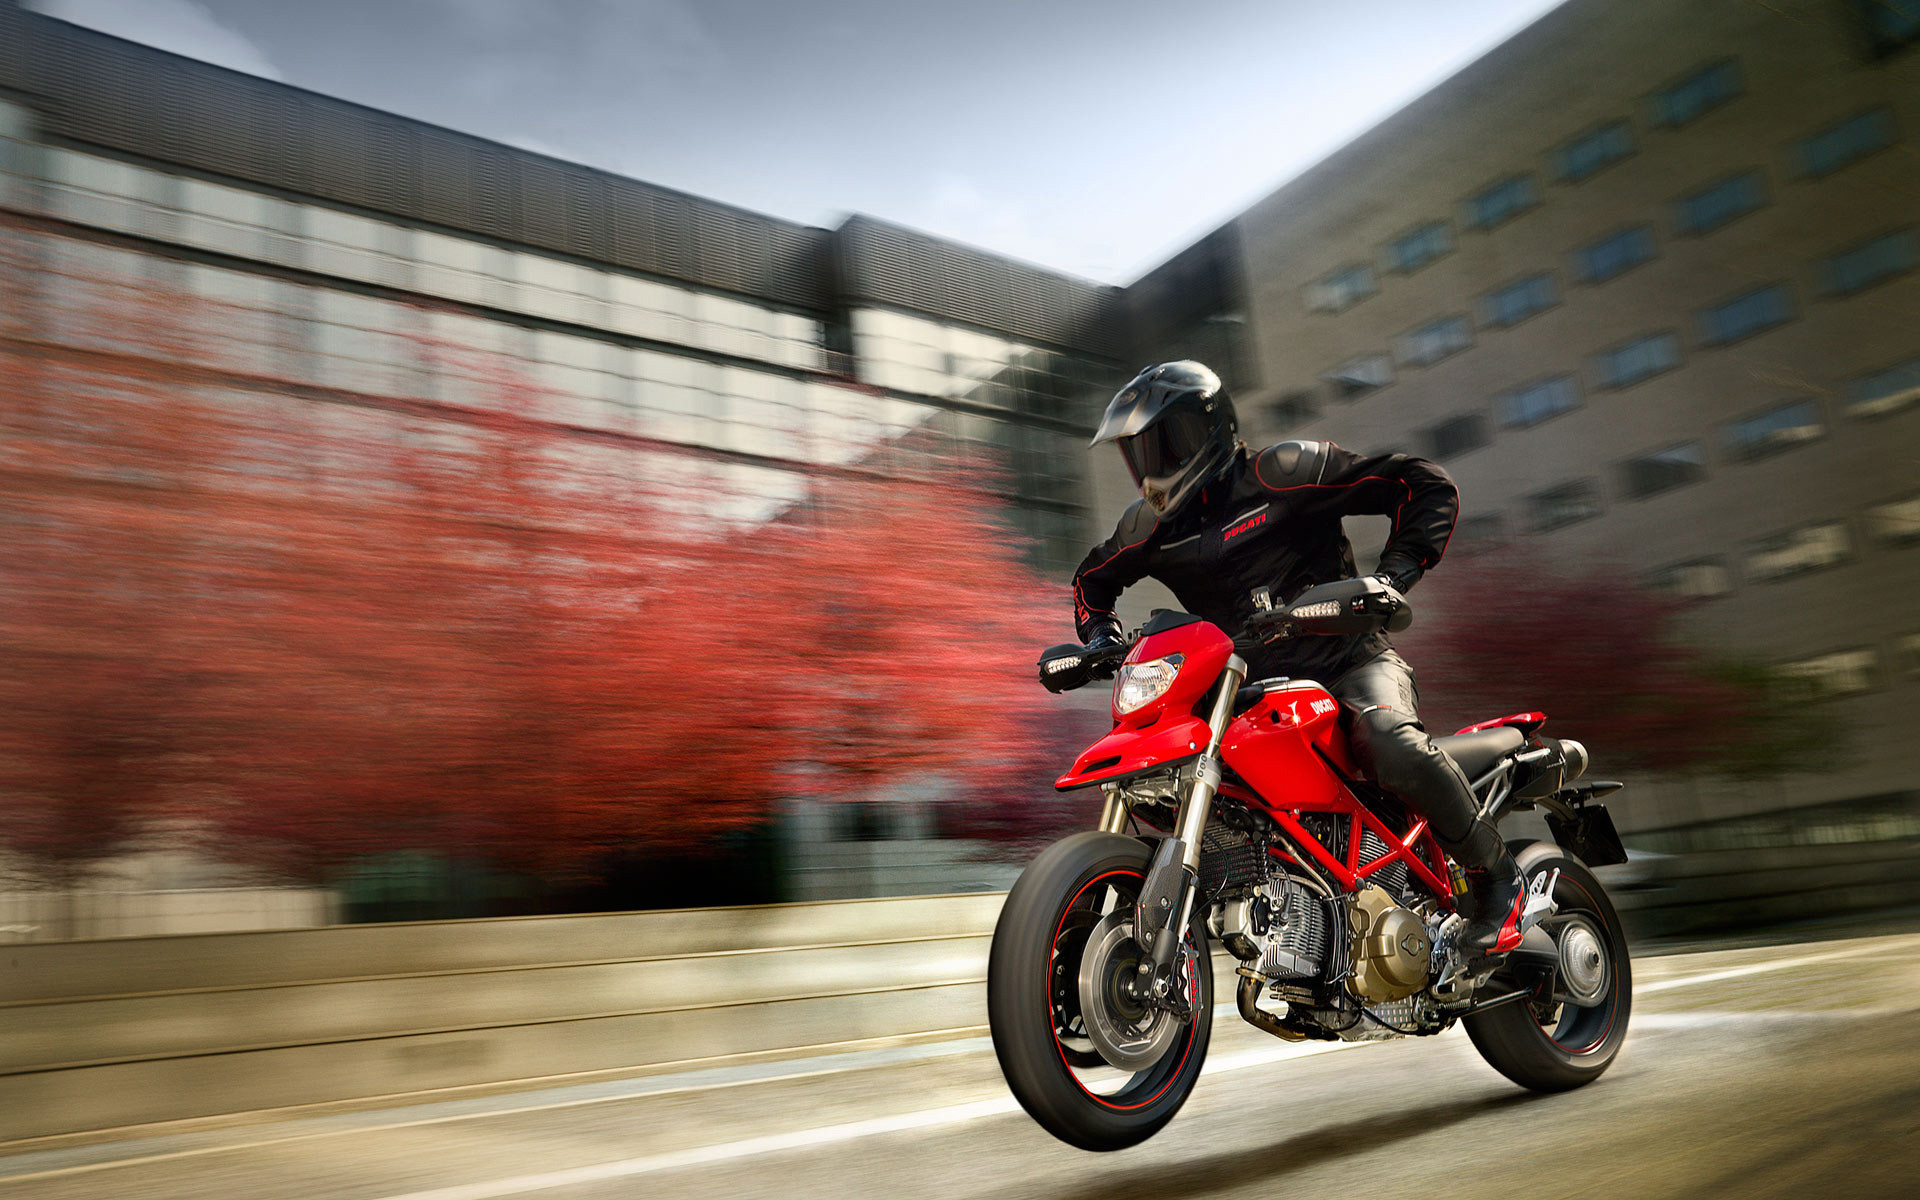 Ducati Hypermotard supermoto motorcycle pictures for desktop and other